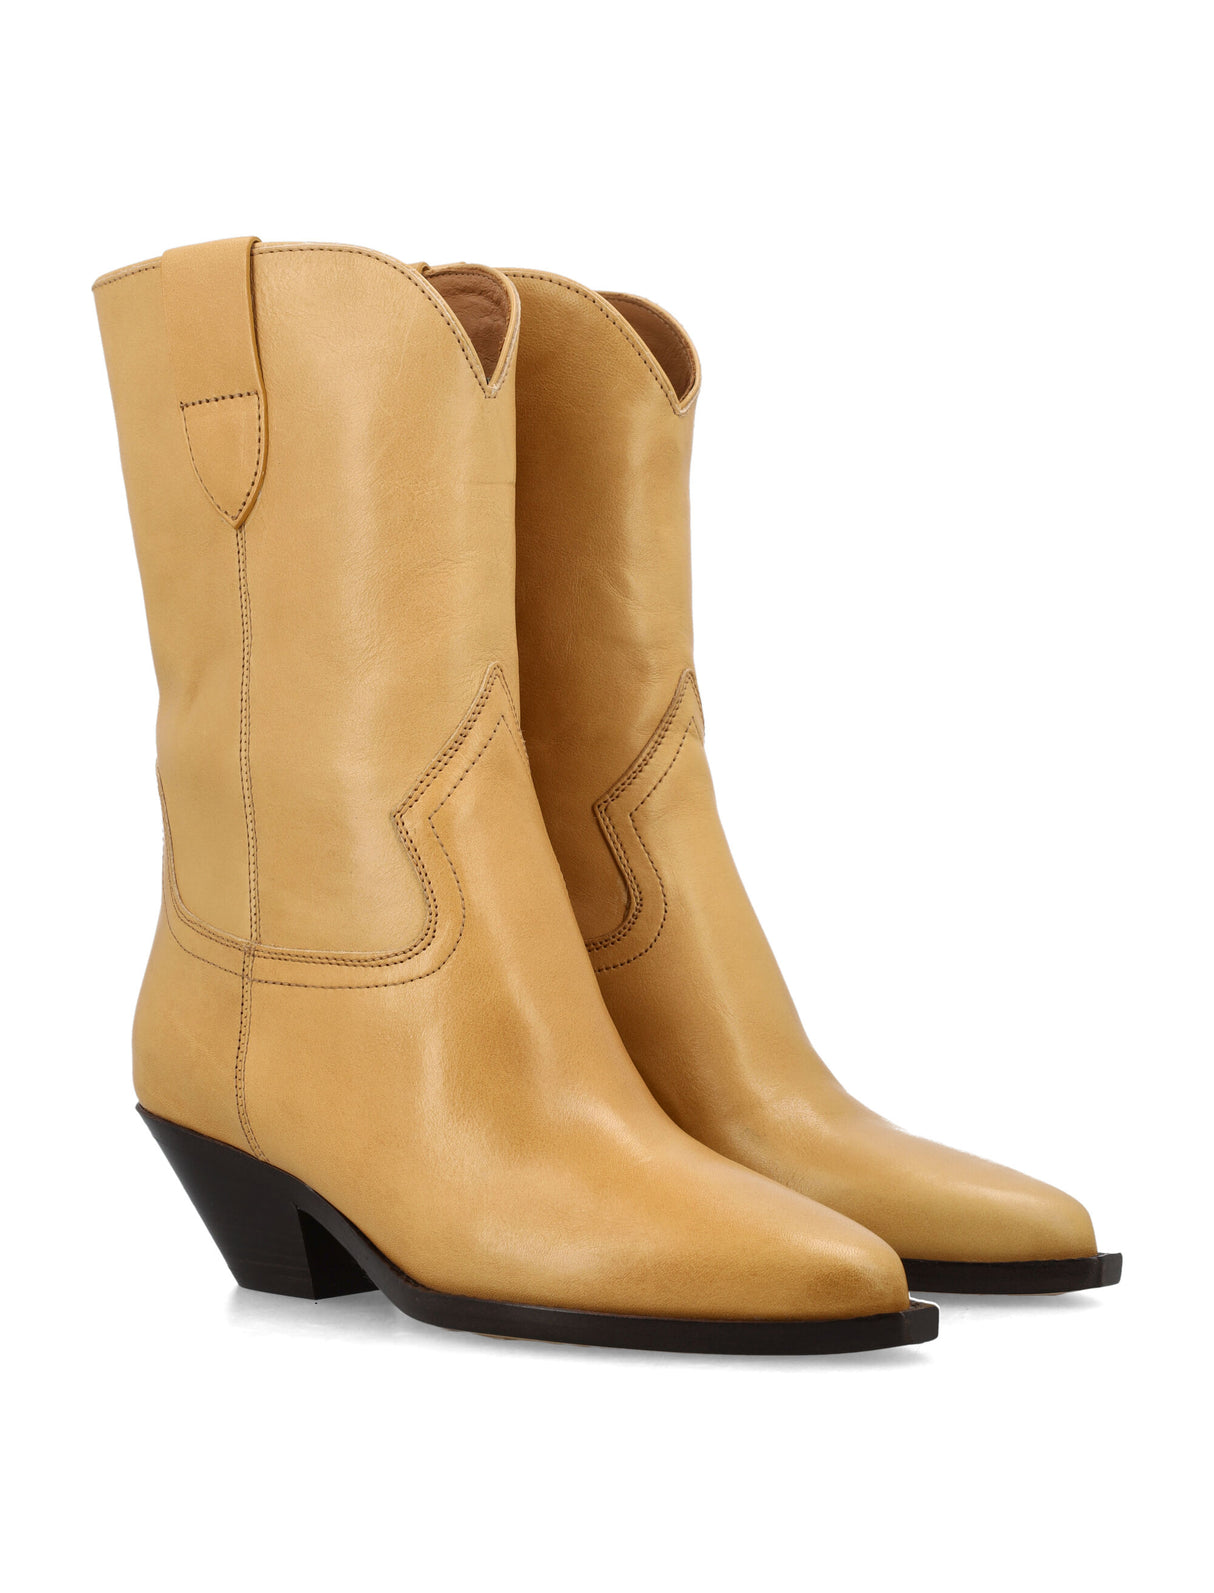 ISABEL MARANT Natural Leather Pointed Toe Cowboy Boots for Women